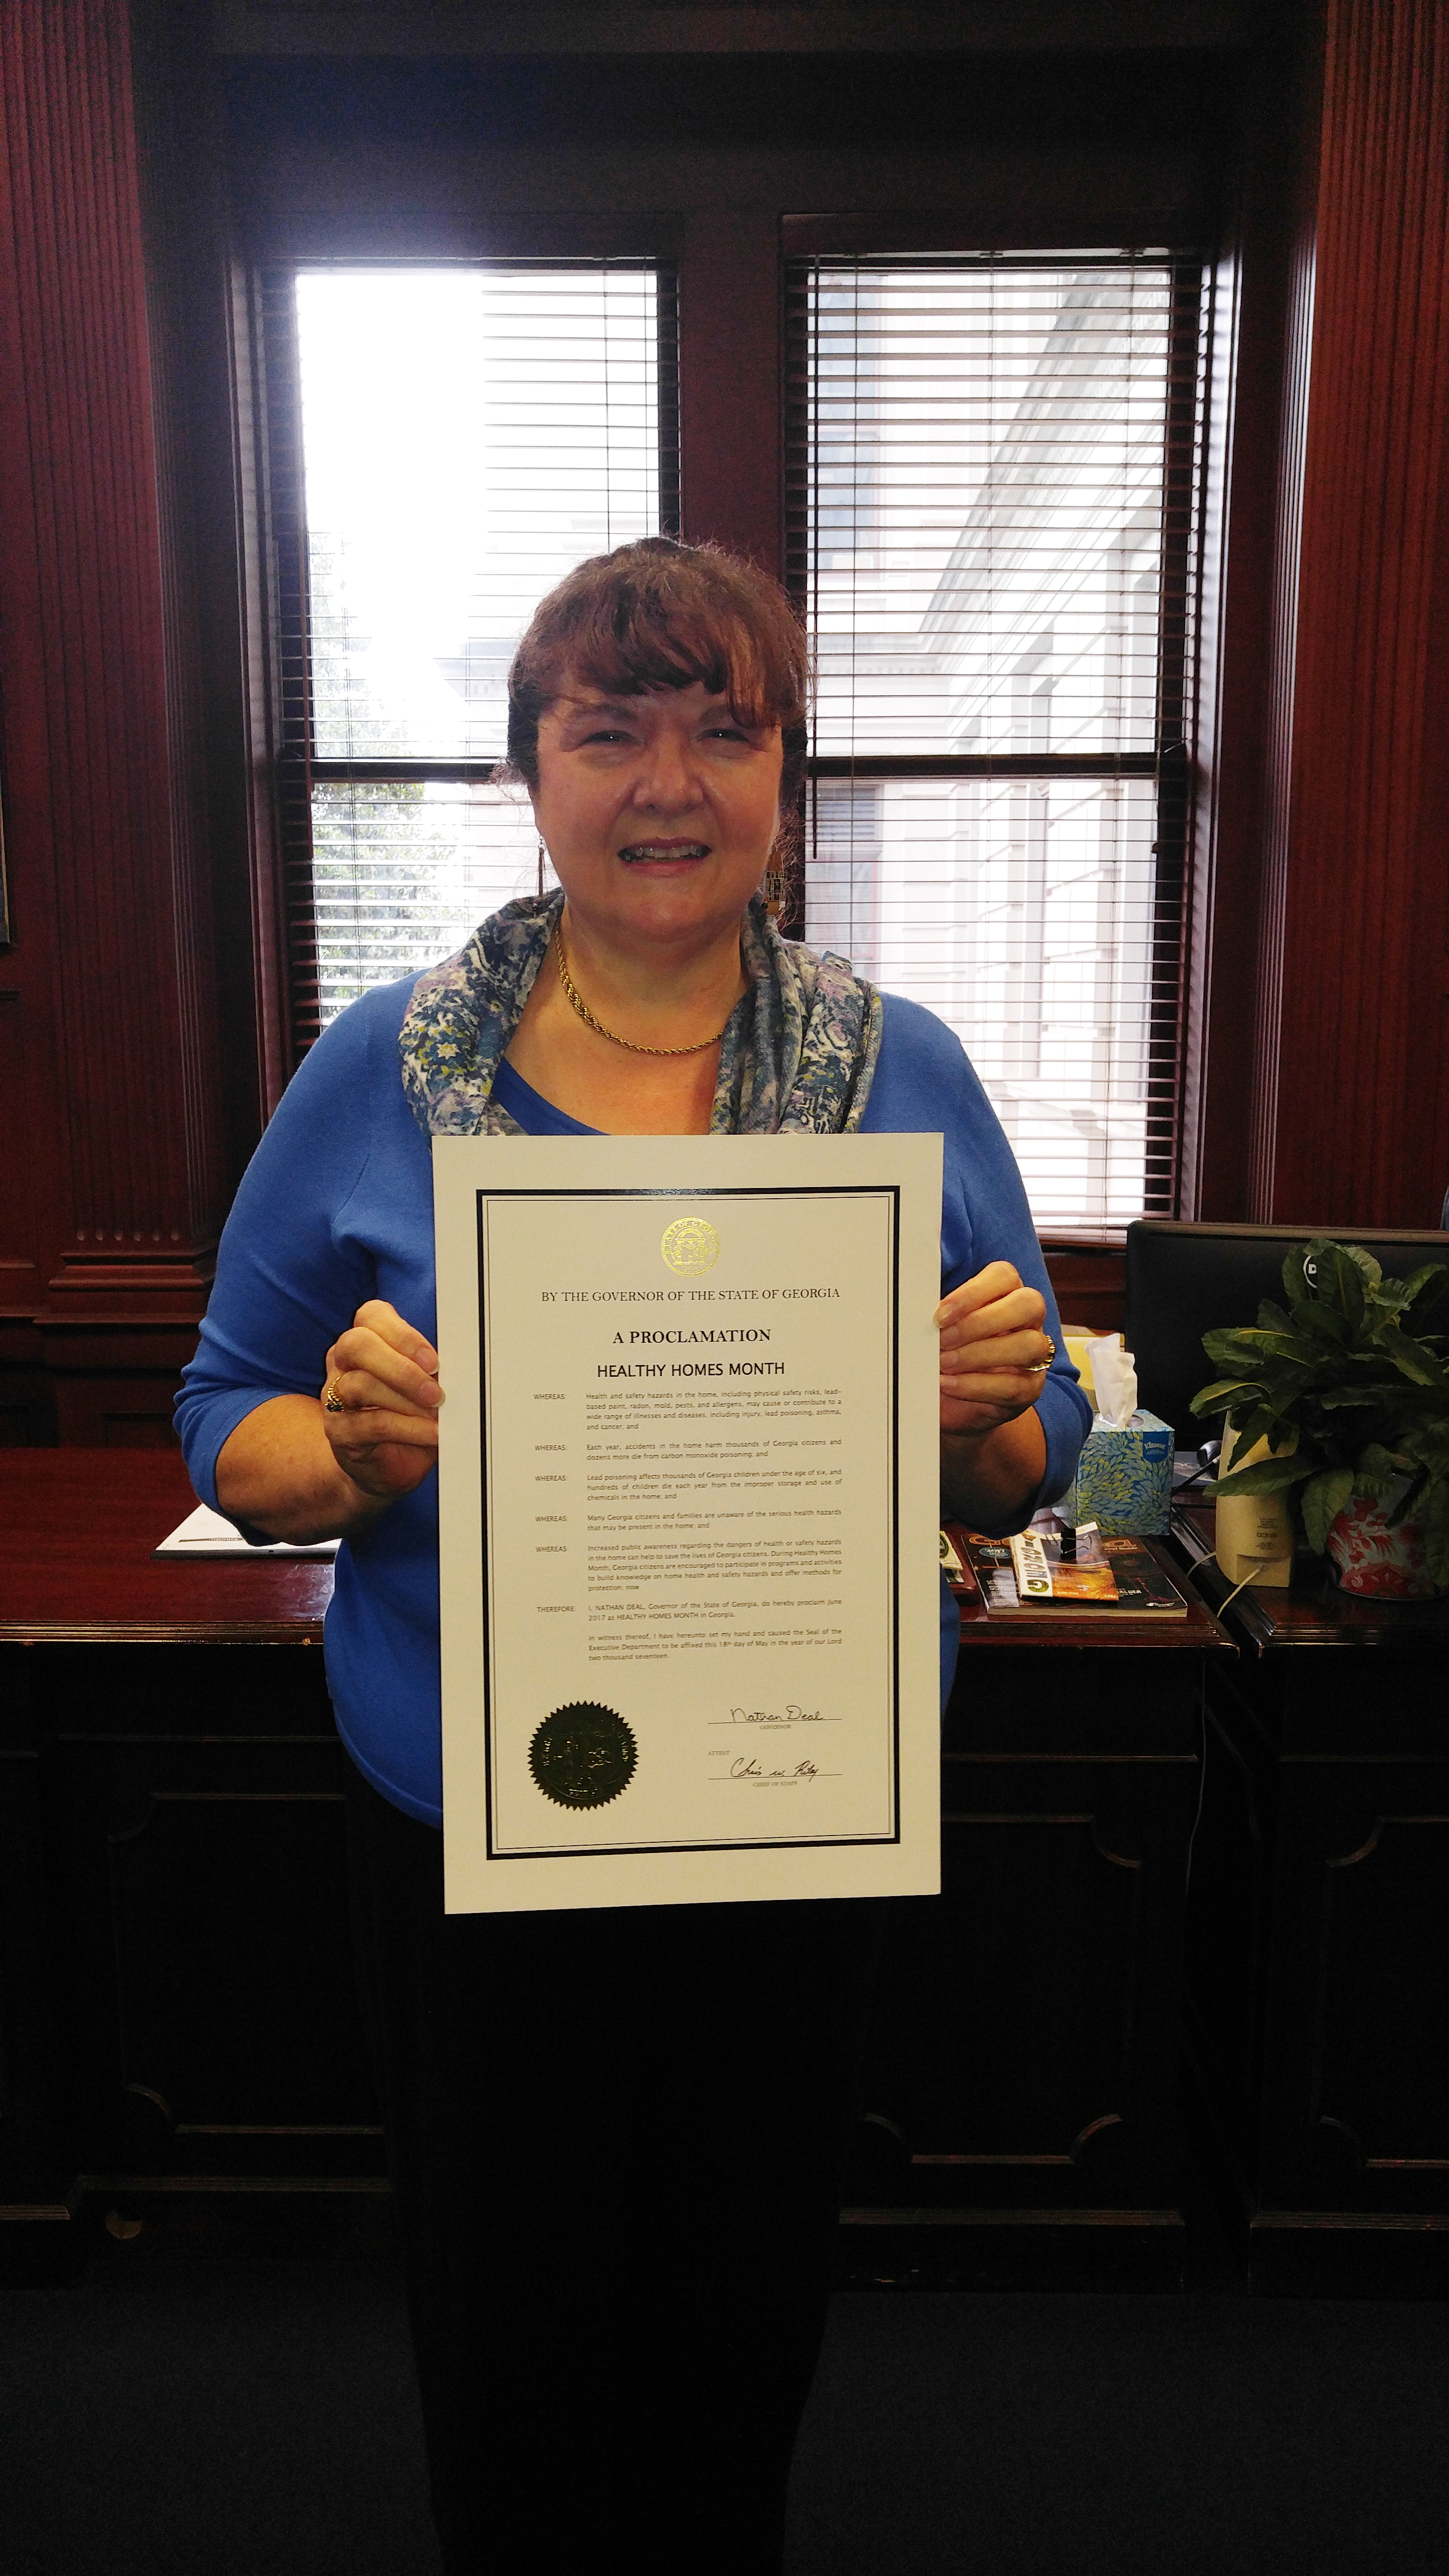 Pamela Turner, UGA Extension housing specialist, serves on the boards of the Georgia Healthy Home Coalition and the Rural Georgia Healthy Housing Advisory Board, both of which worked with Gov. Nathan Deal to proclaim June Healthy Homes Month.